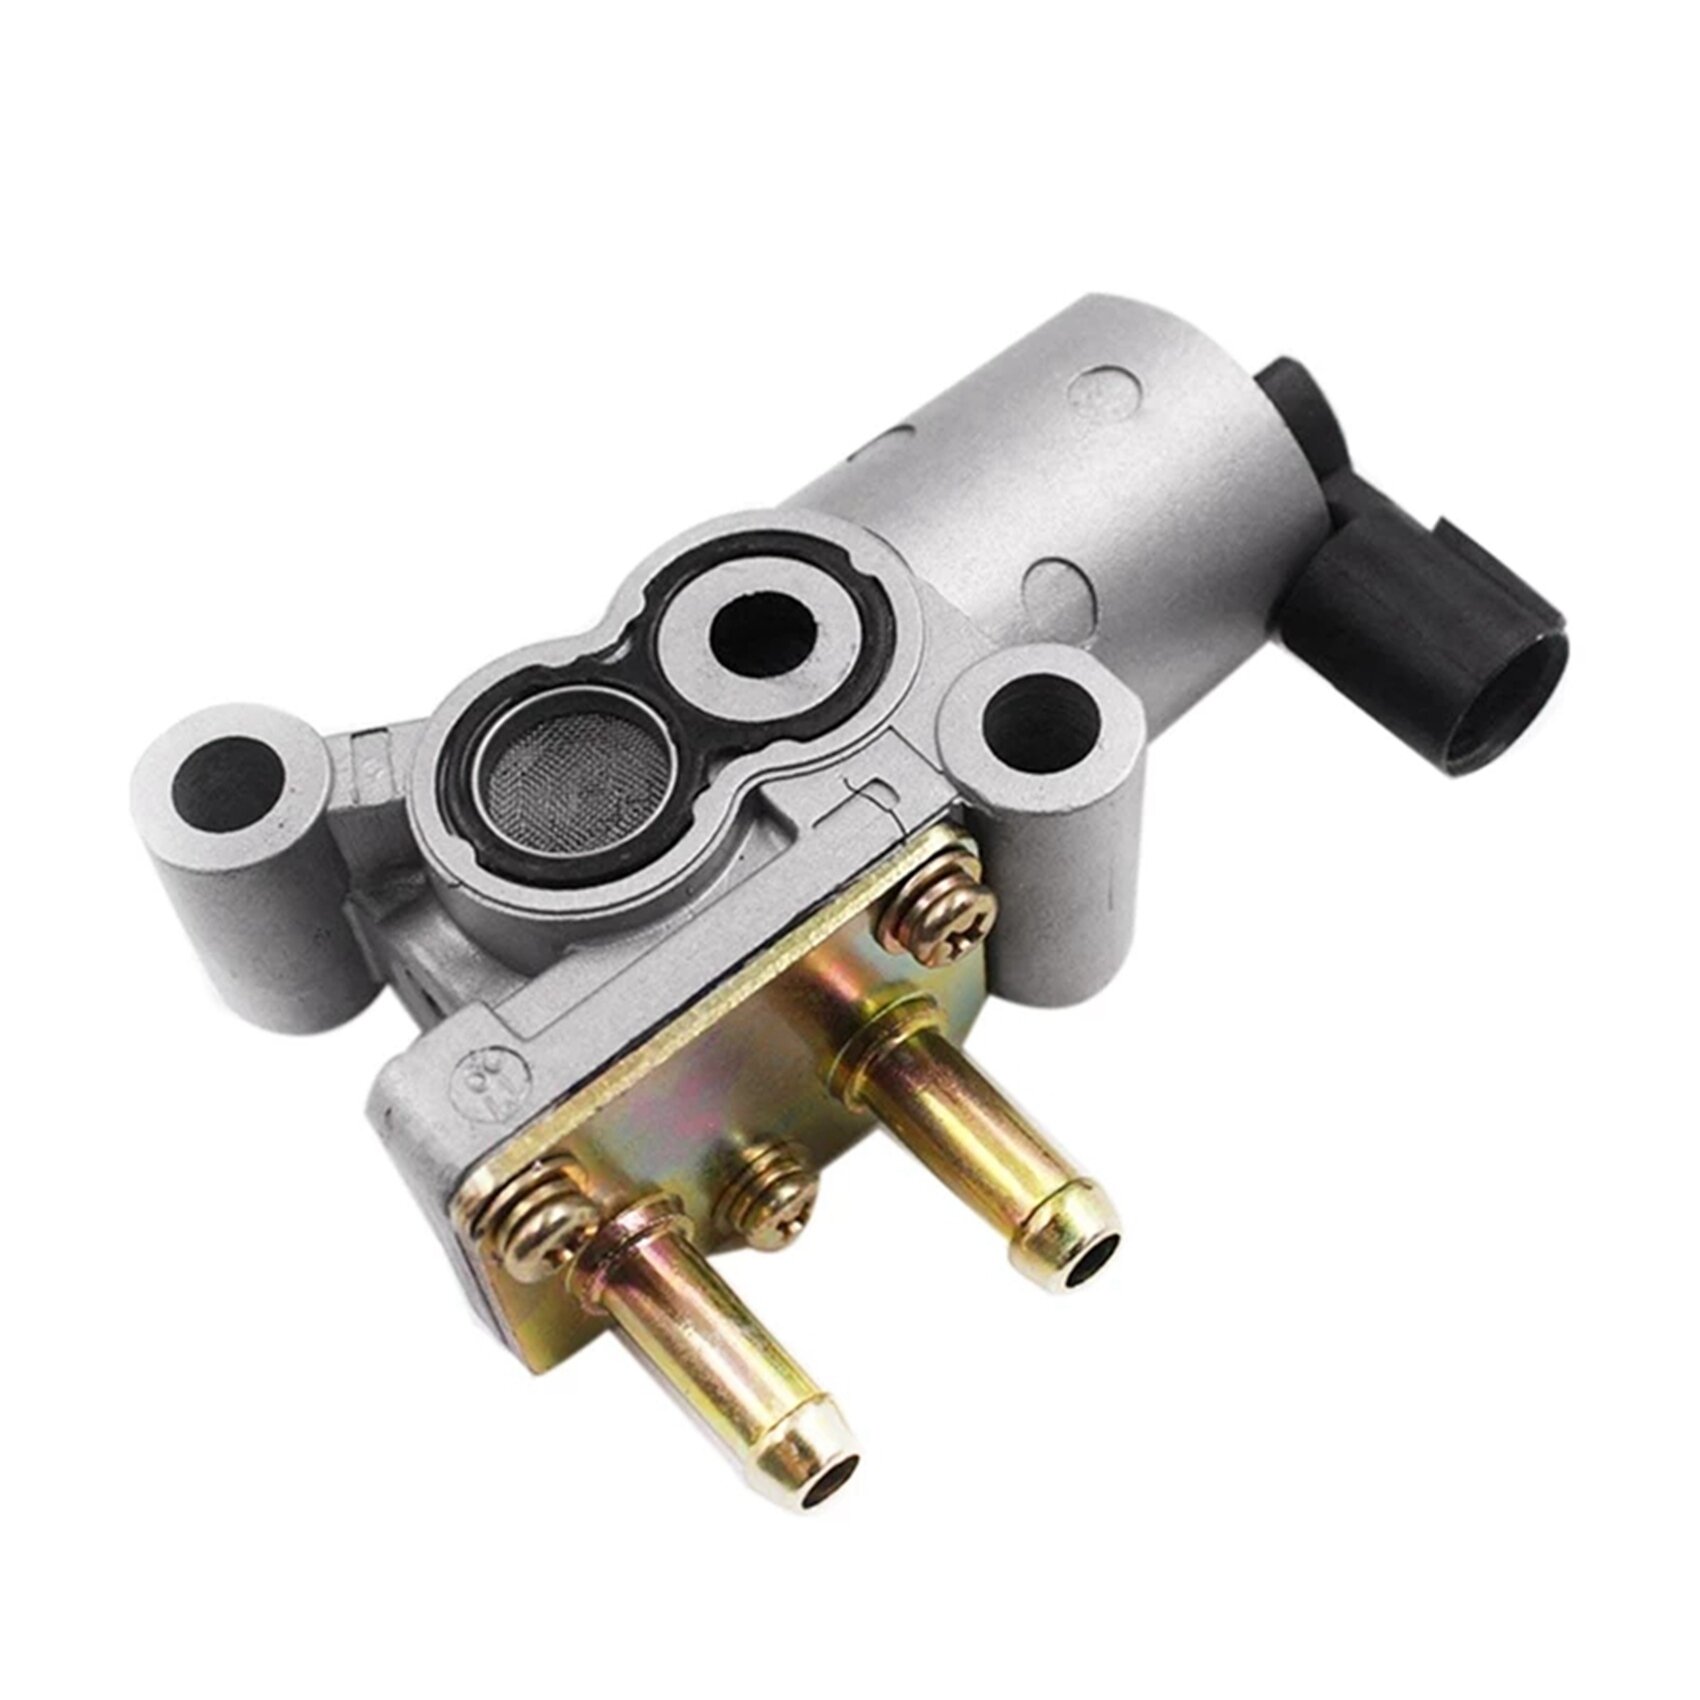 New Idle Air Control Valve for 1.5L 1992-1995 36450-P3F-004 36450P3F004 36450-P08-004